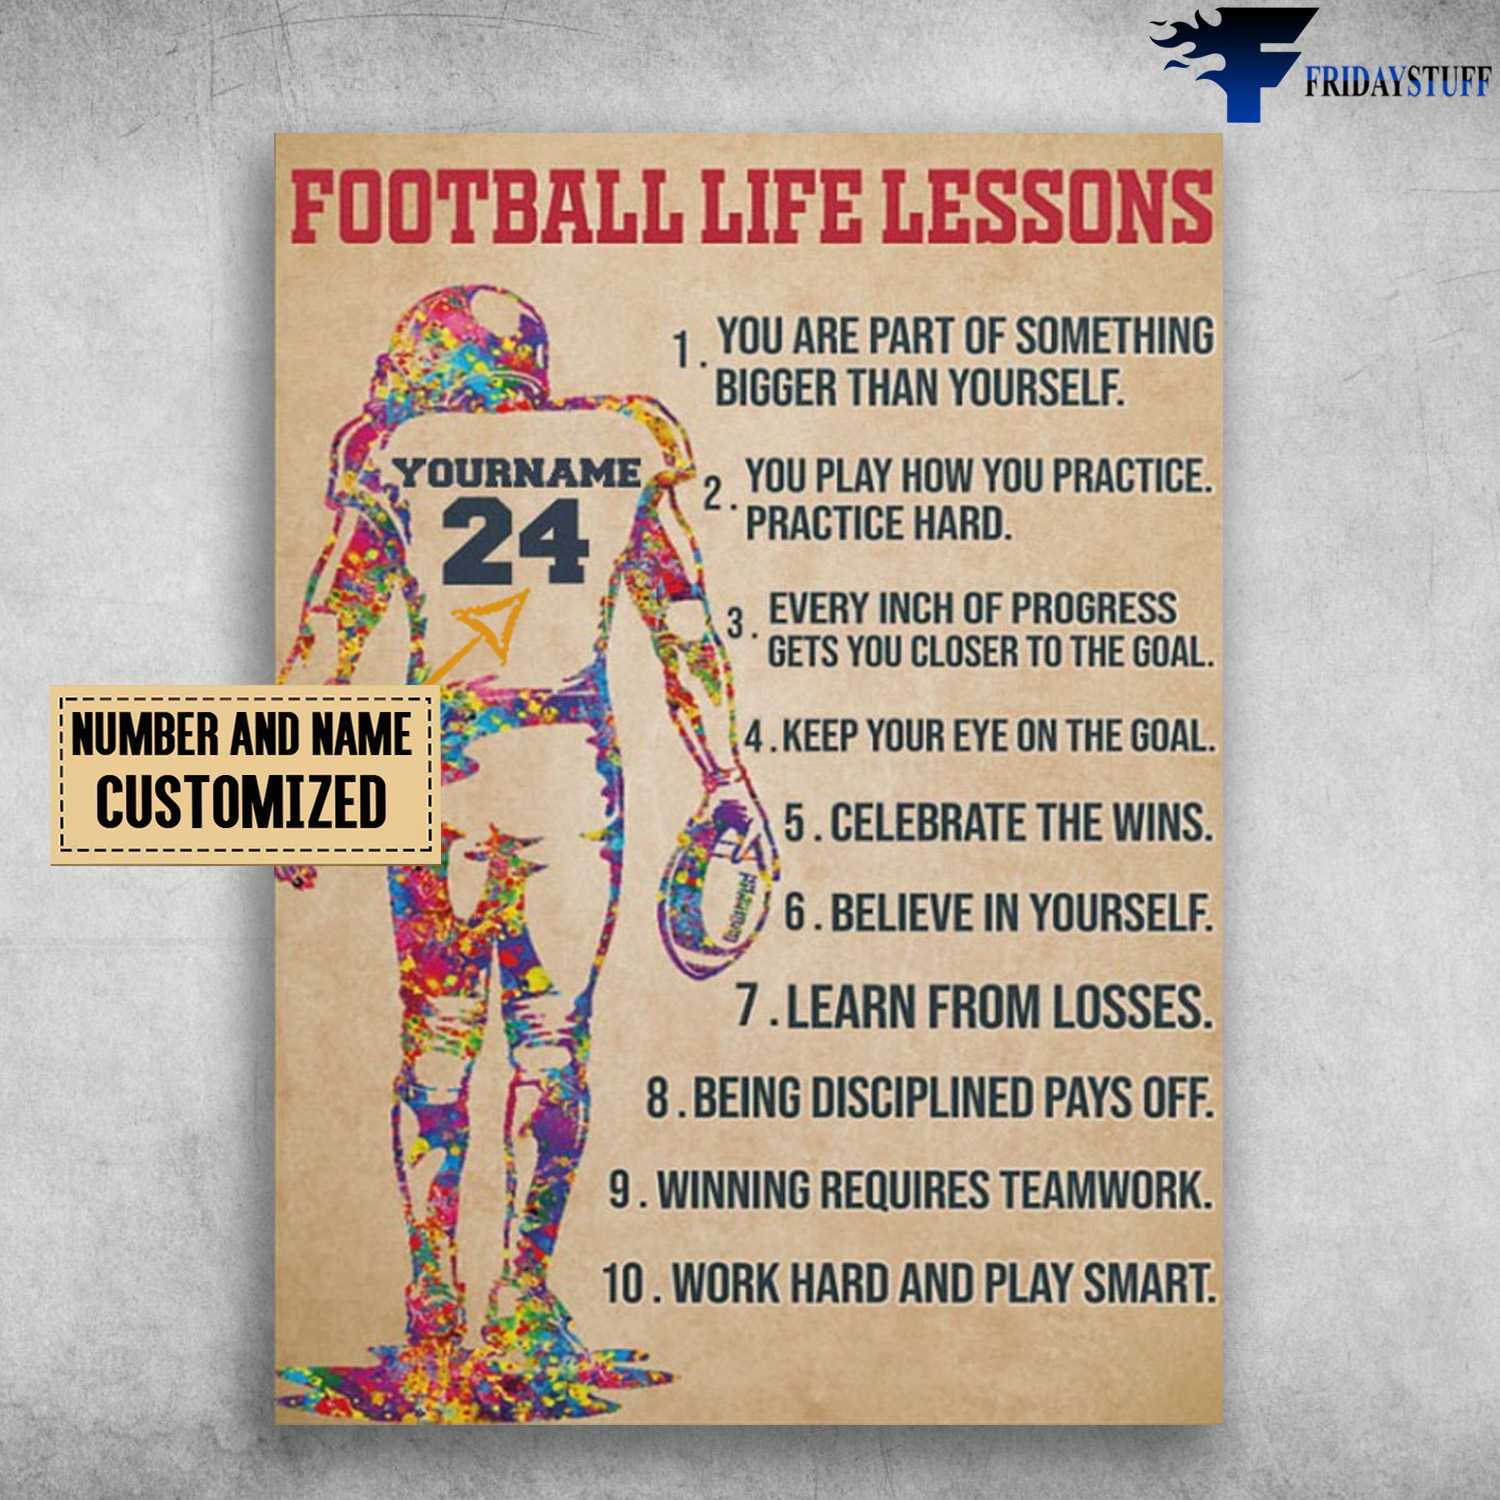 Football Life Lessons, Football Poster, You Are Part Of Something Bigger Than Yourself, You Play How You Practice, Practice Hard, Every Inch Of Progress Gets You Closer To The Goal